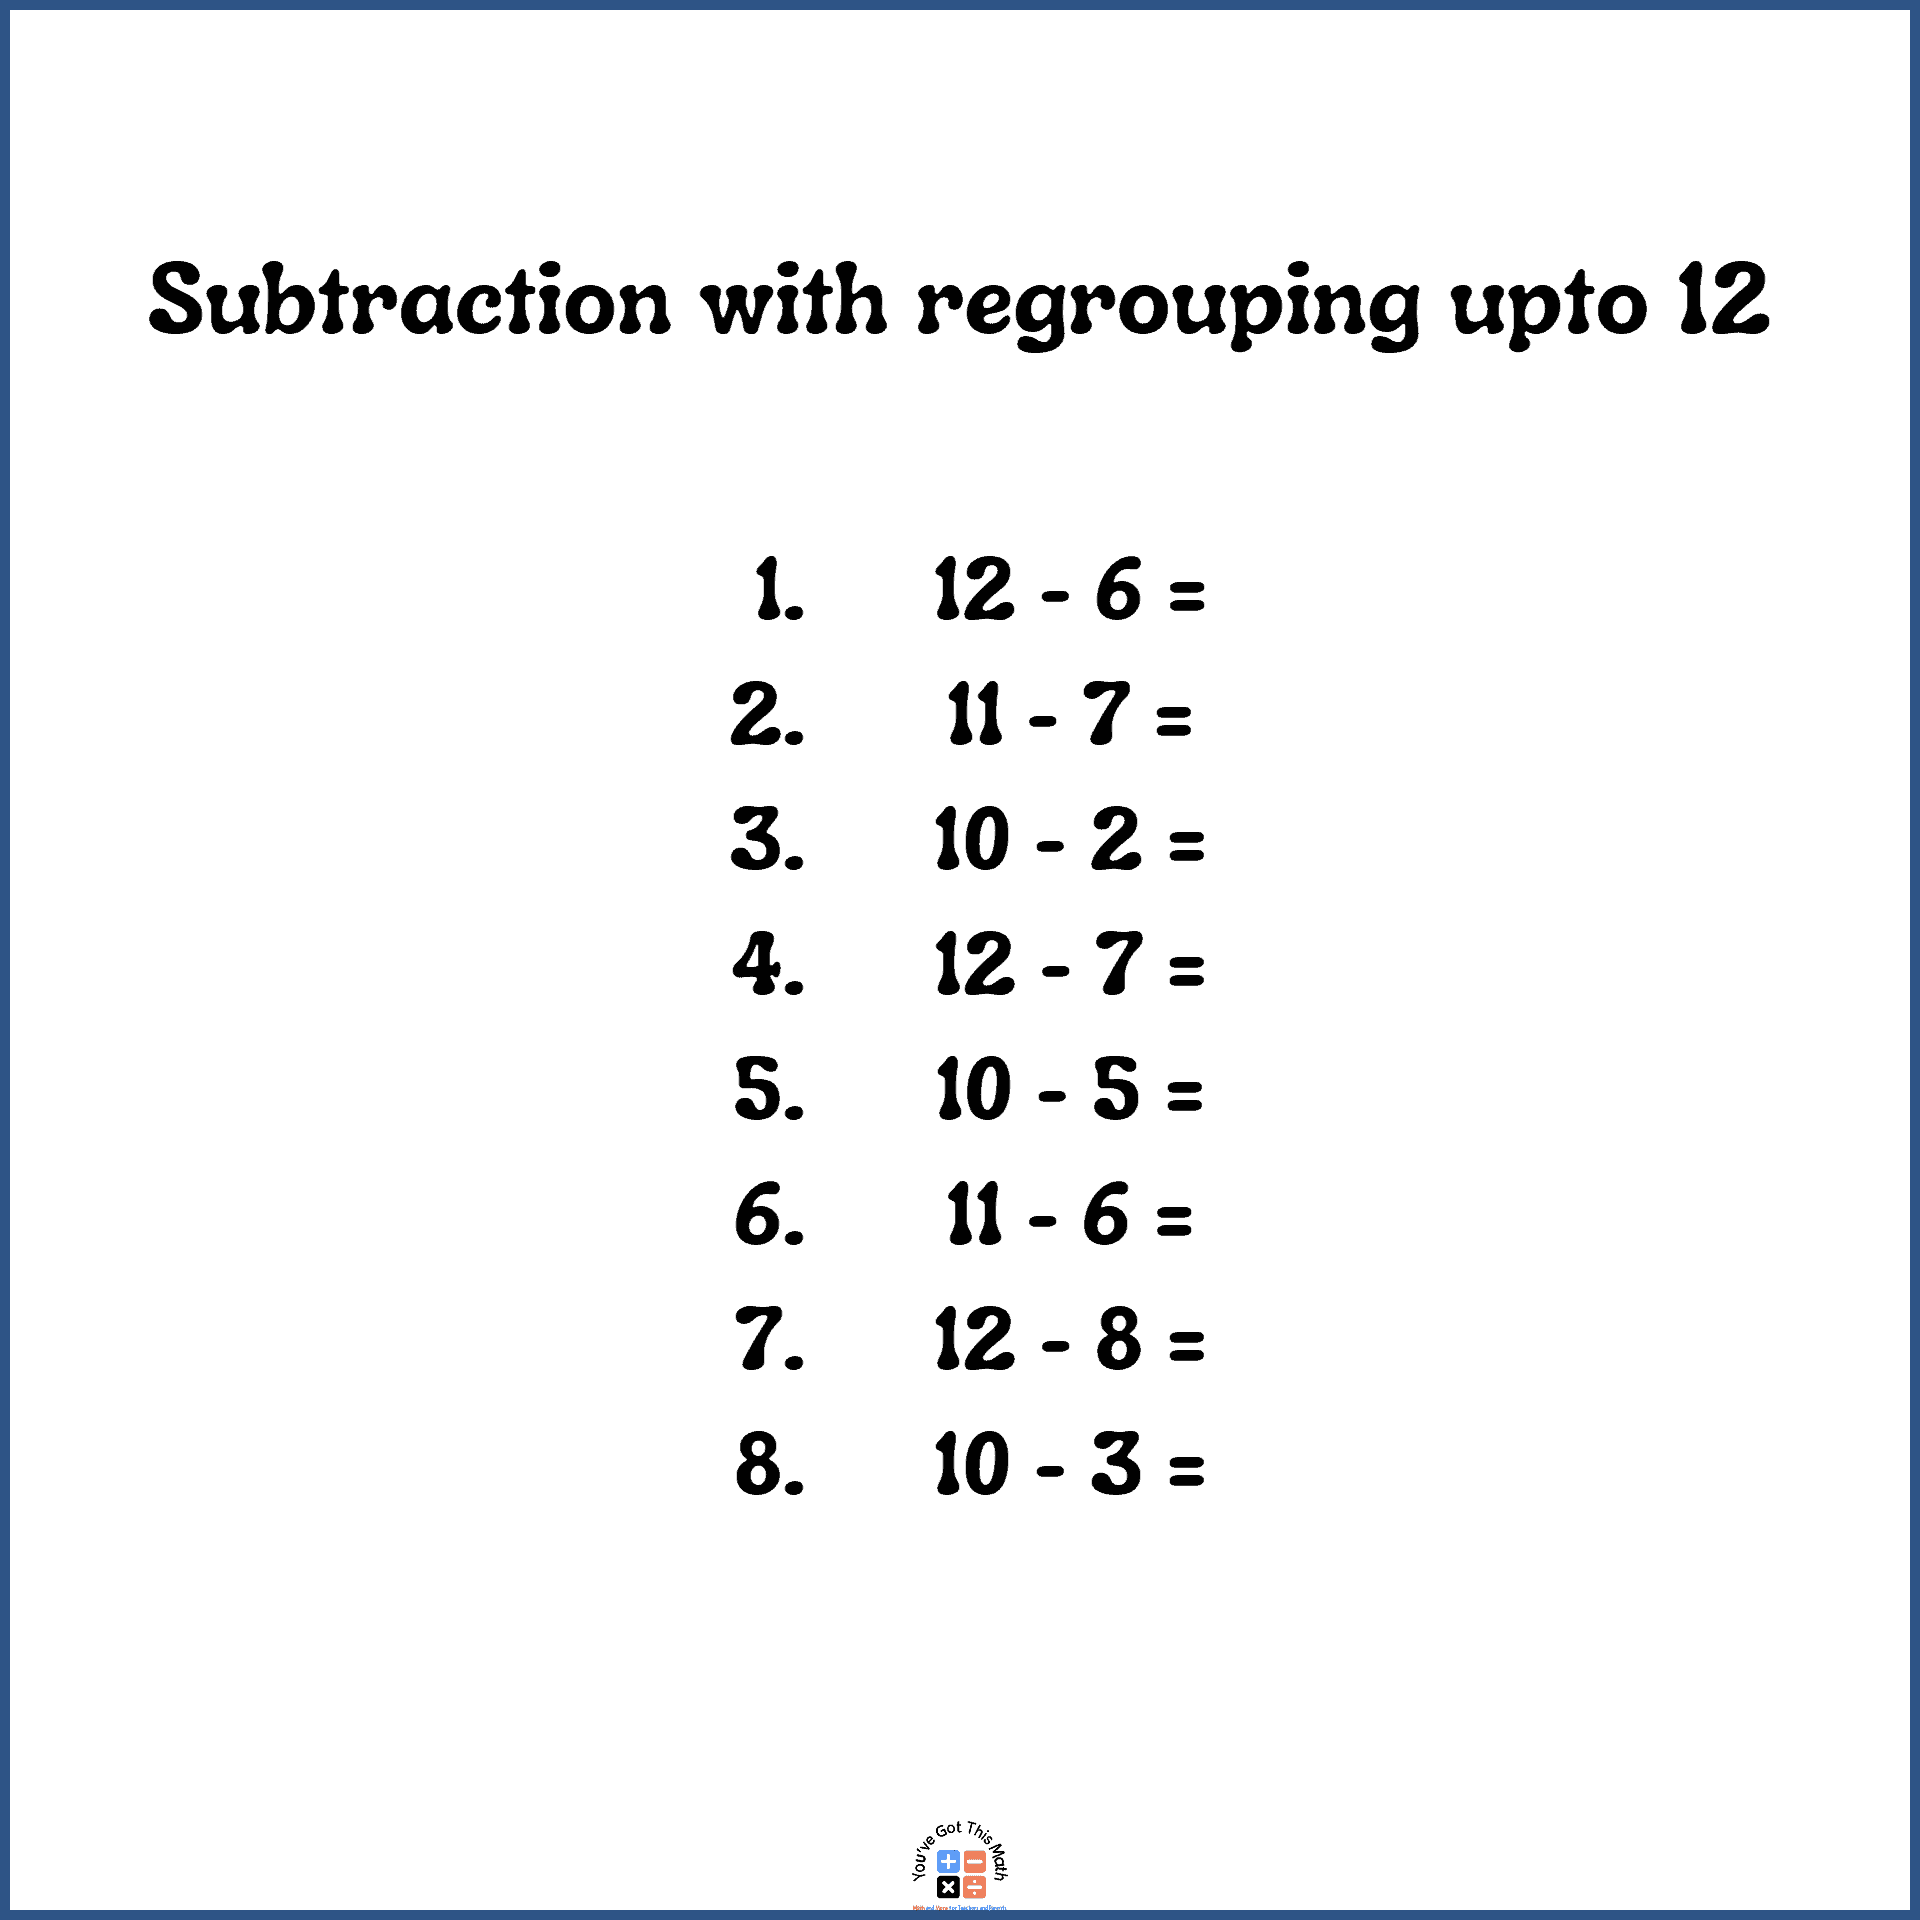 Subtraction upto 12 to subtract 2 digit numbers with regrouping.